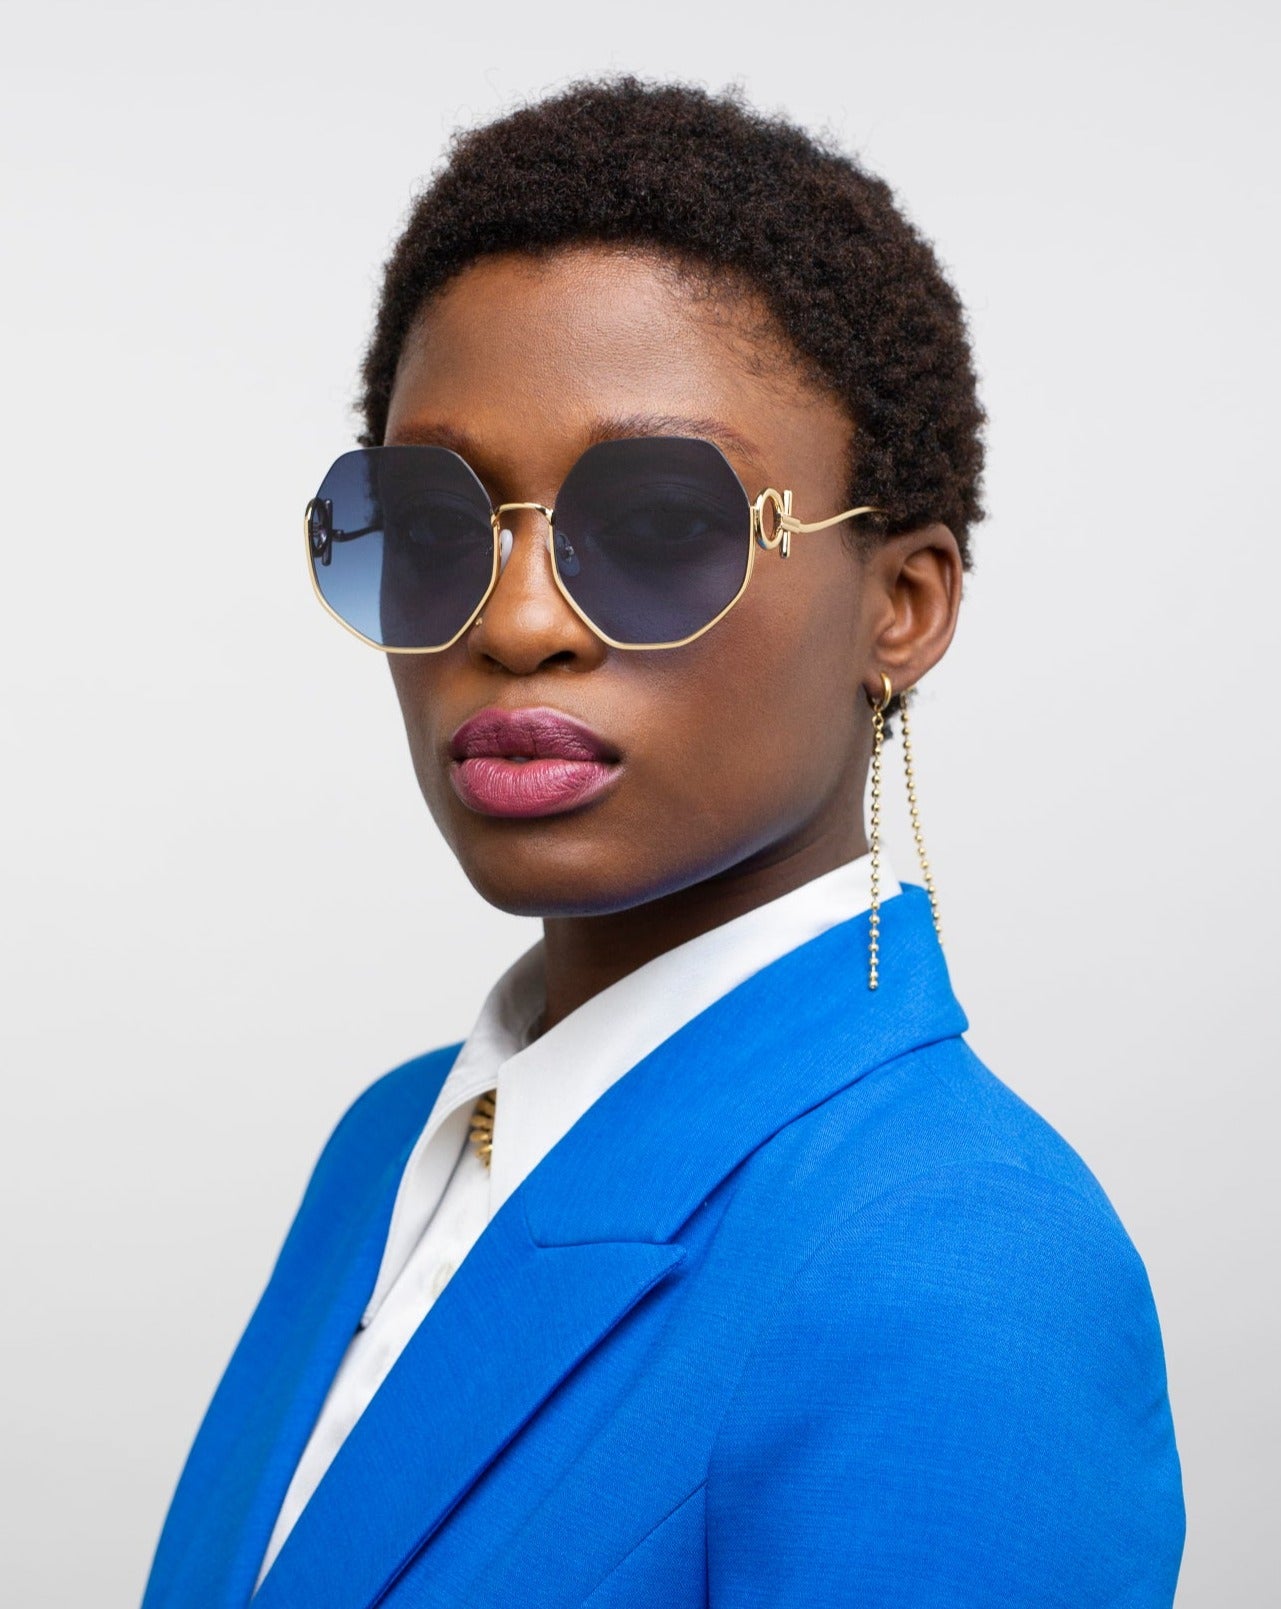 A person wearing octagonal navy blue sunglasses with UVA & UVB protection from For Art's Sake® called Palace, a blue blazer over a white shirt, and an earring with multiple 18-karat gold-plated chains running down from it. The person has short curly black hair and is standing against a plain light grey background.